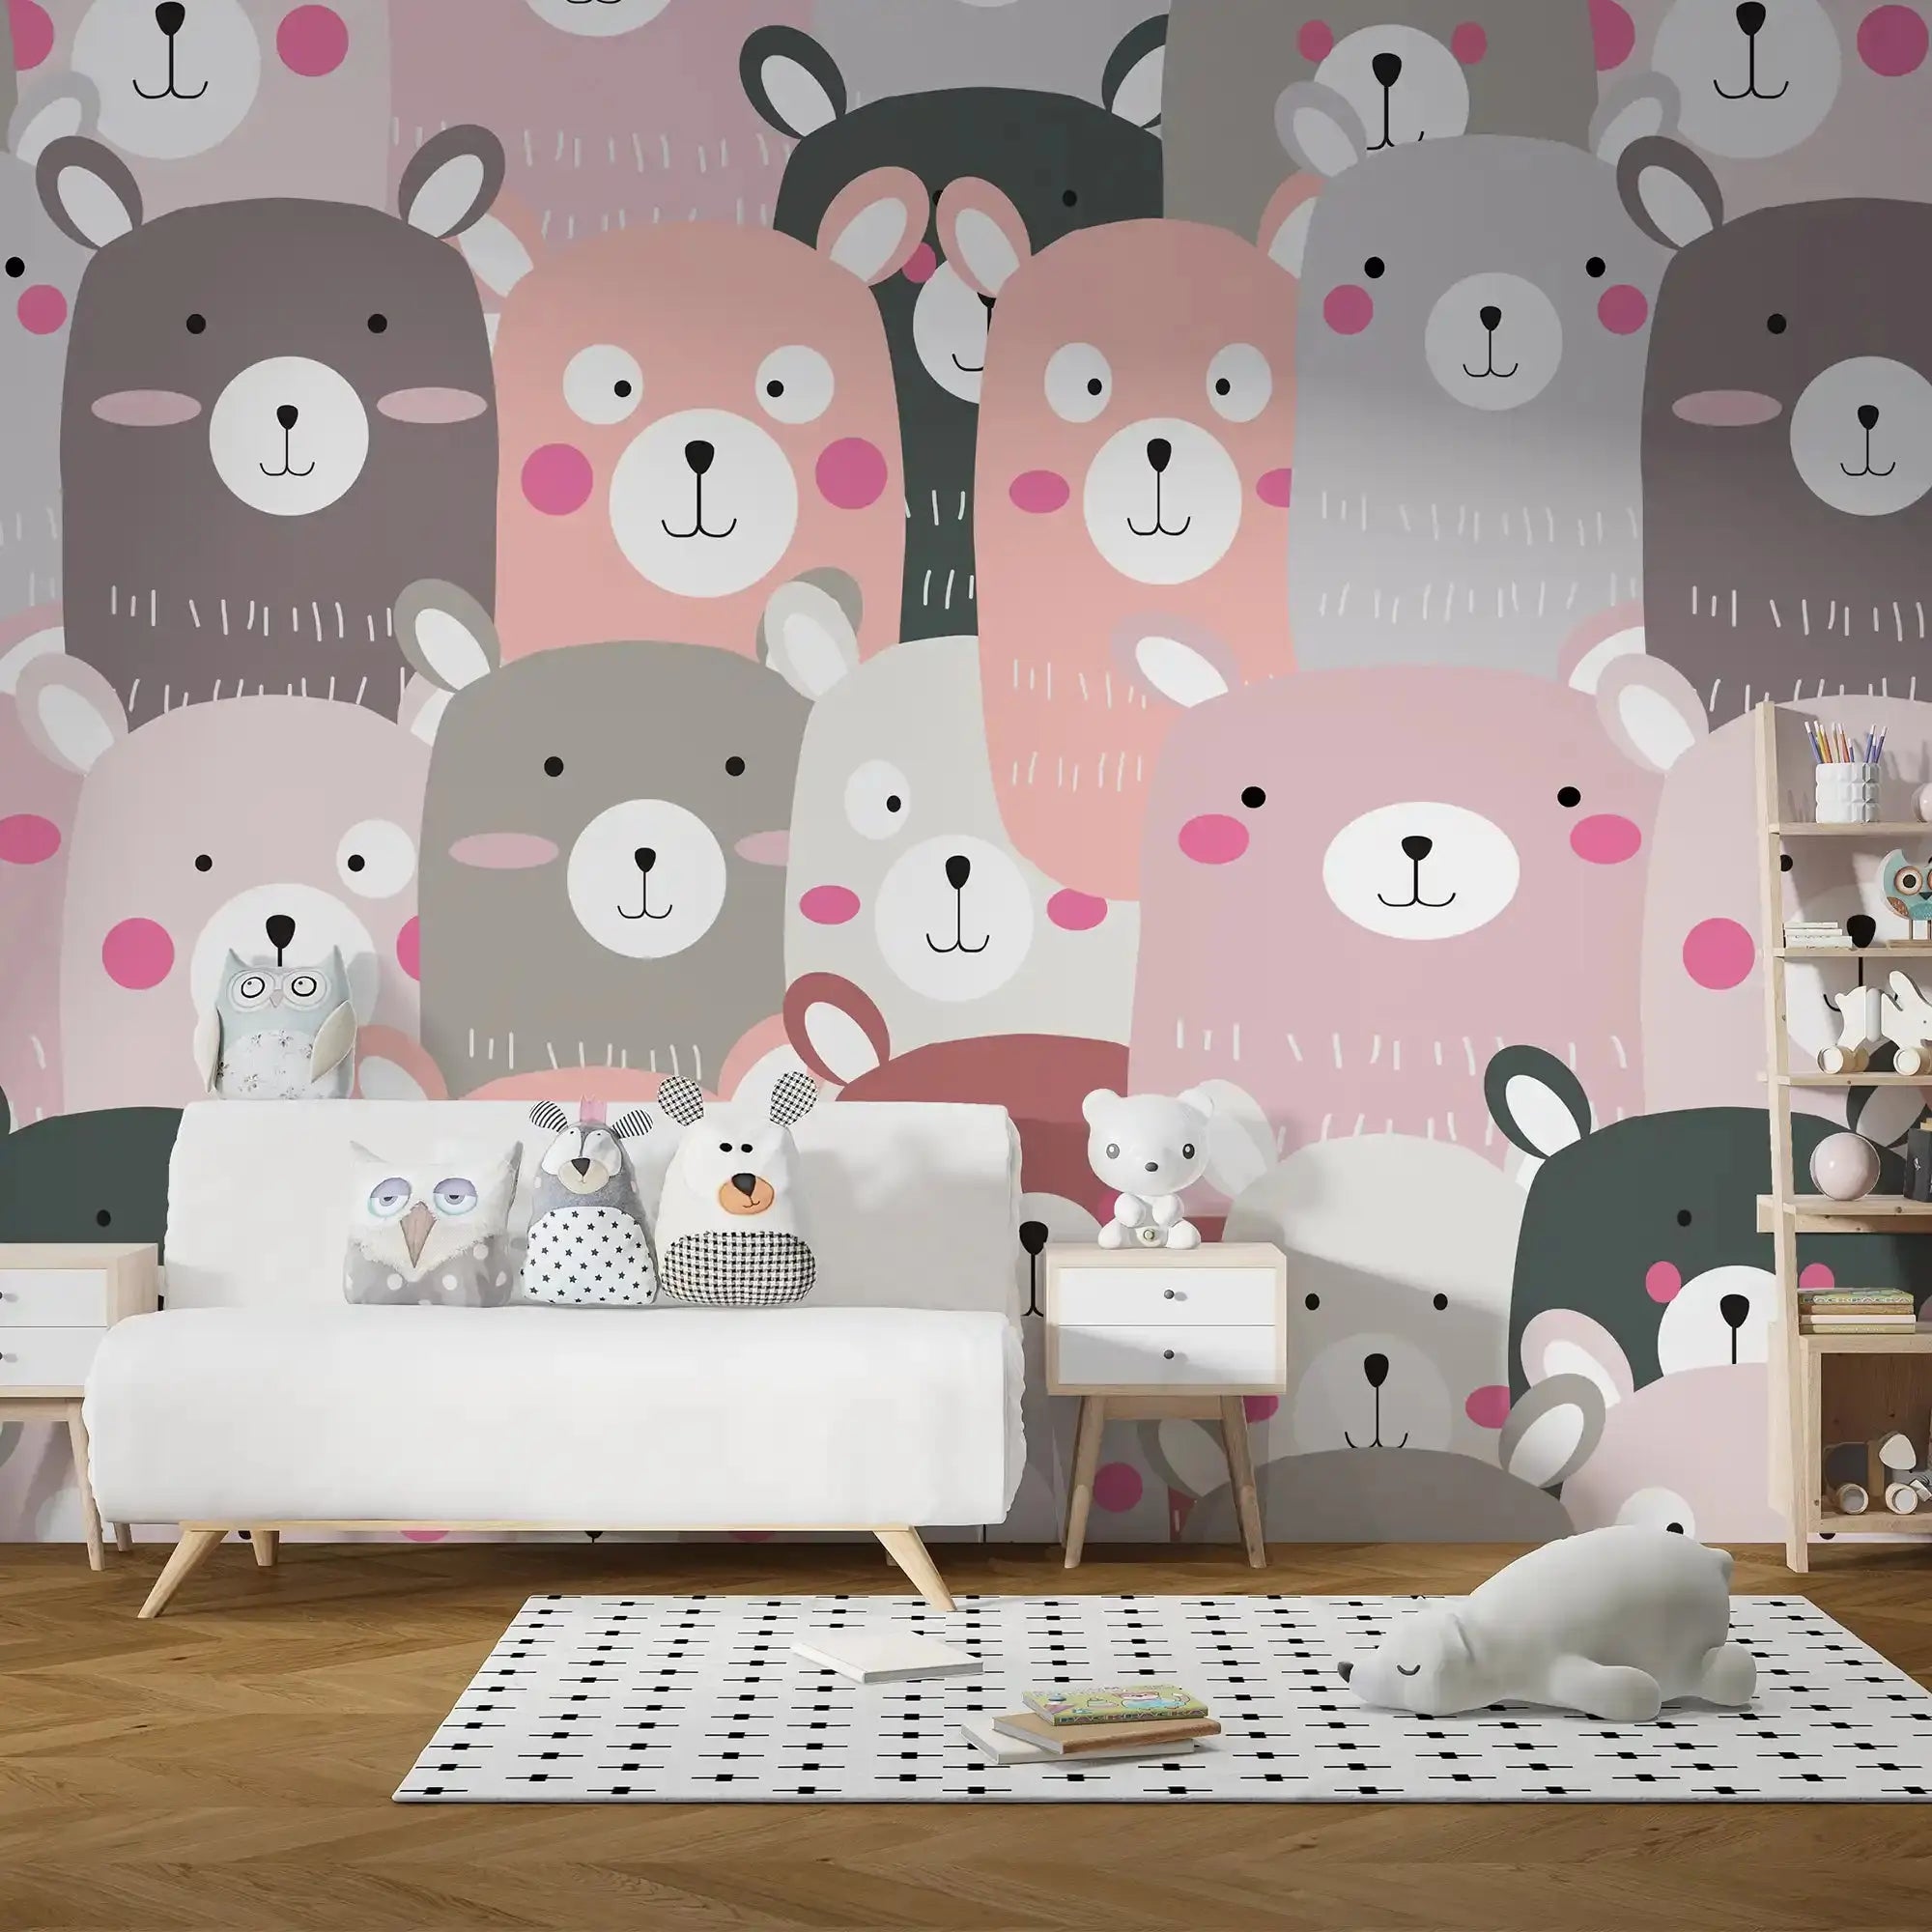 6004 / Adorable Bear Pattern Peel and Stick Nursery Wallpaper - Easy to Apply and Remove - Muted Colors for Kids Room Decor - Eco-Friendly and High Quality - Artevella